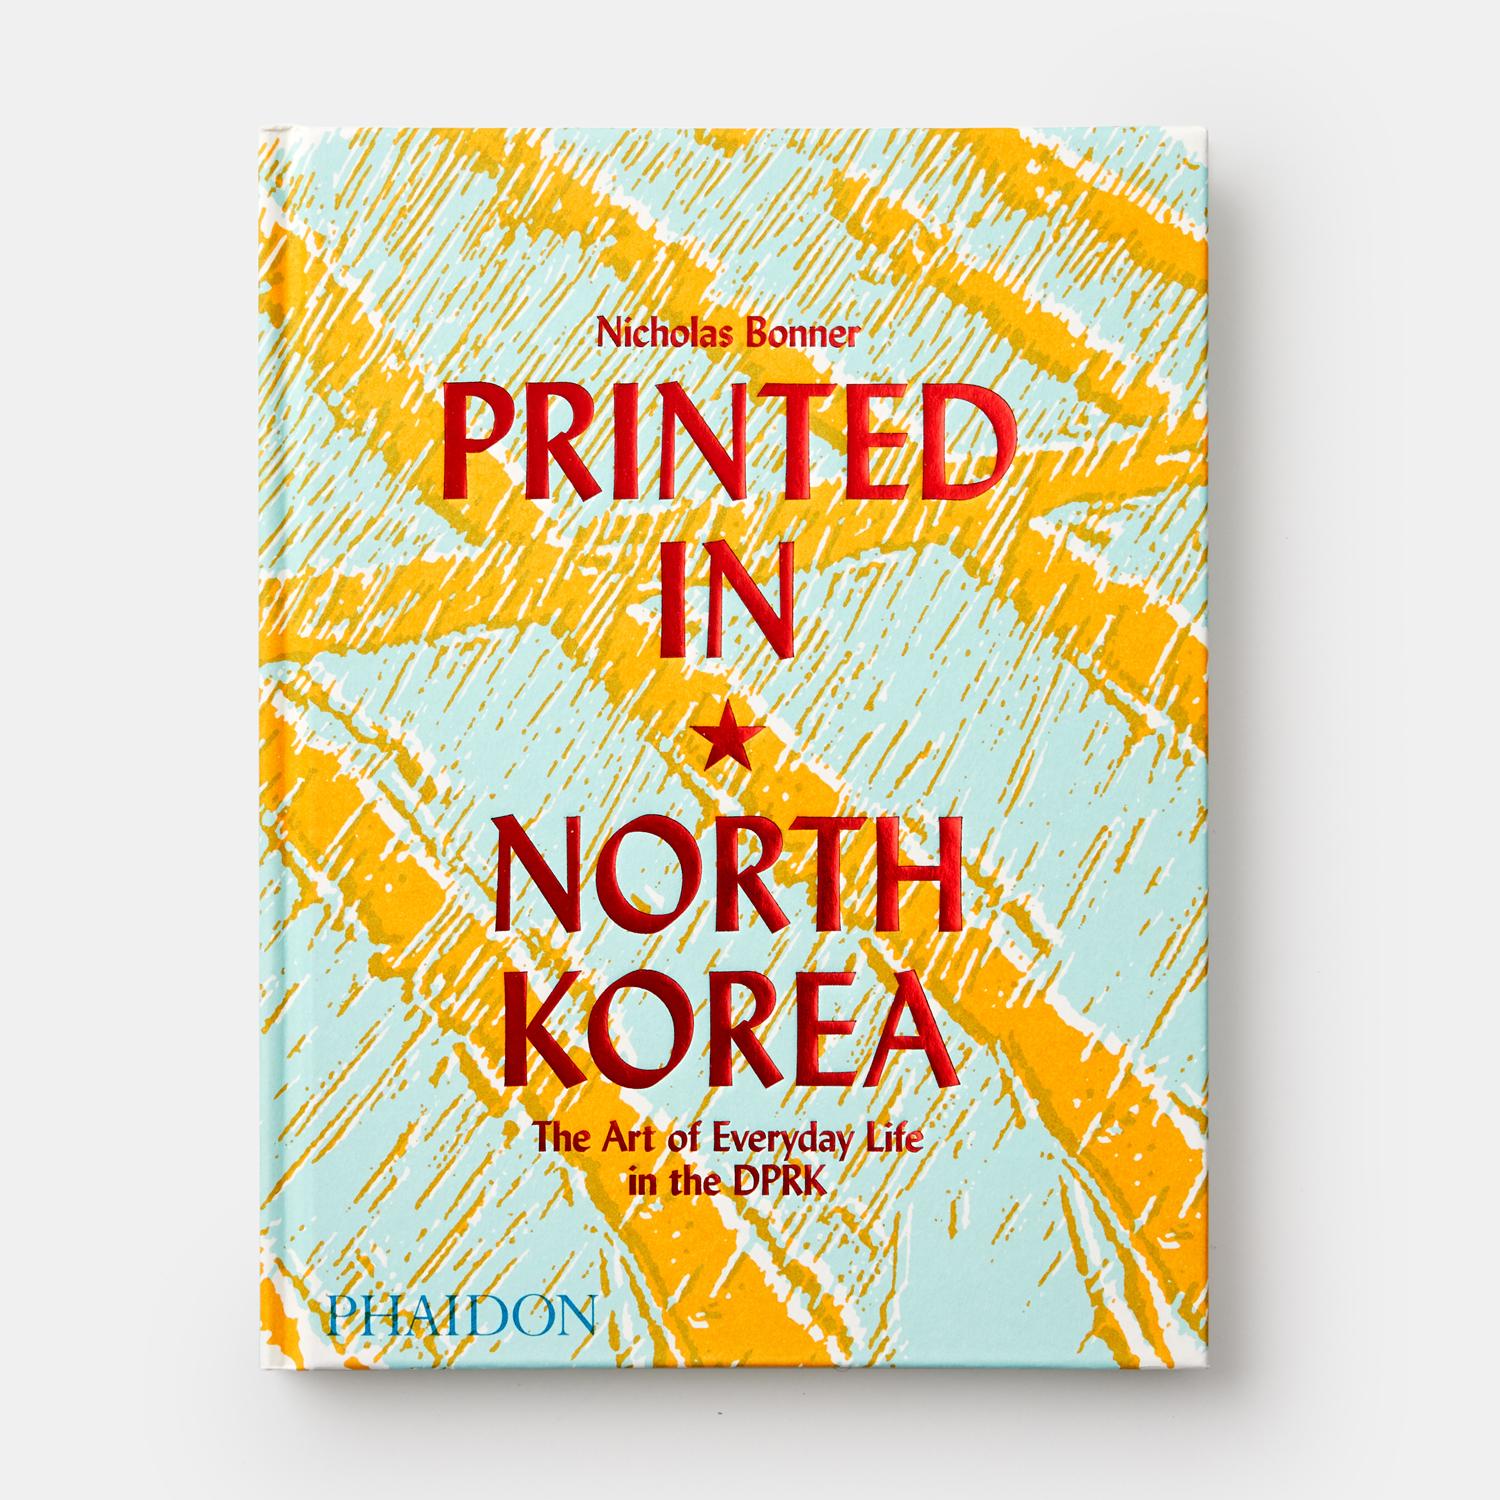 Never-before-seen North Korea - a rare glimpse into the country behind the politics and the creativity behind the propaganda


This incredible collection of prints dating from the 1950s to the twenty-first century is the only one of its kind in or